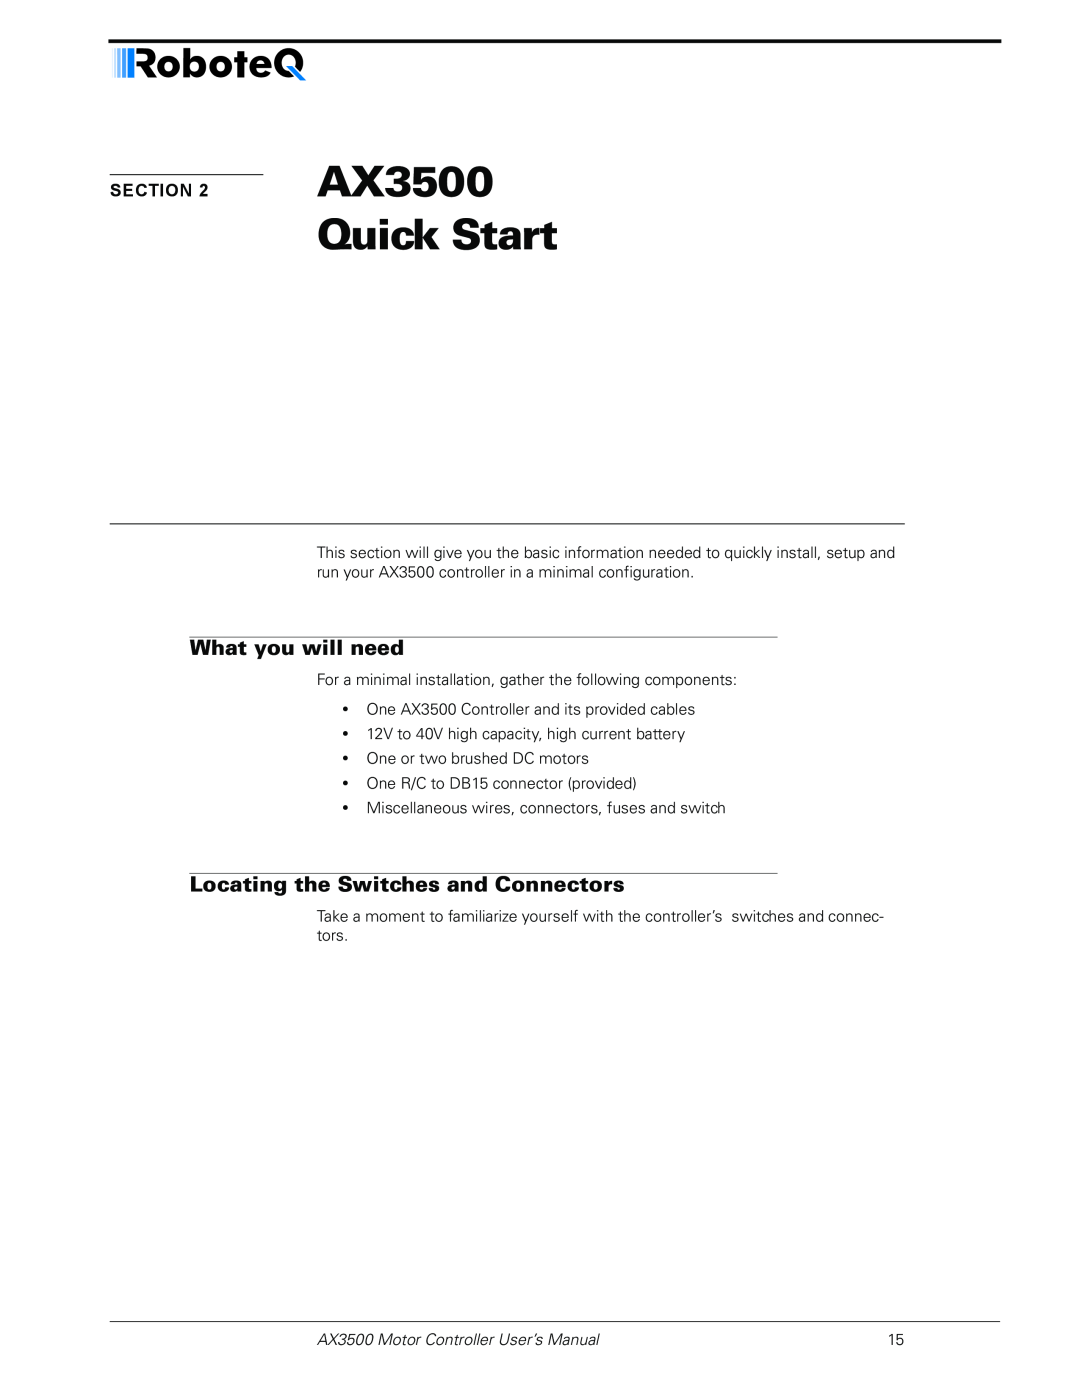 RoboteQ AX3500 user manual Quick Start, What you will need, Locating the Switches and Connectors 